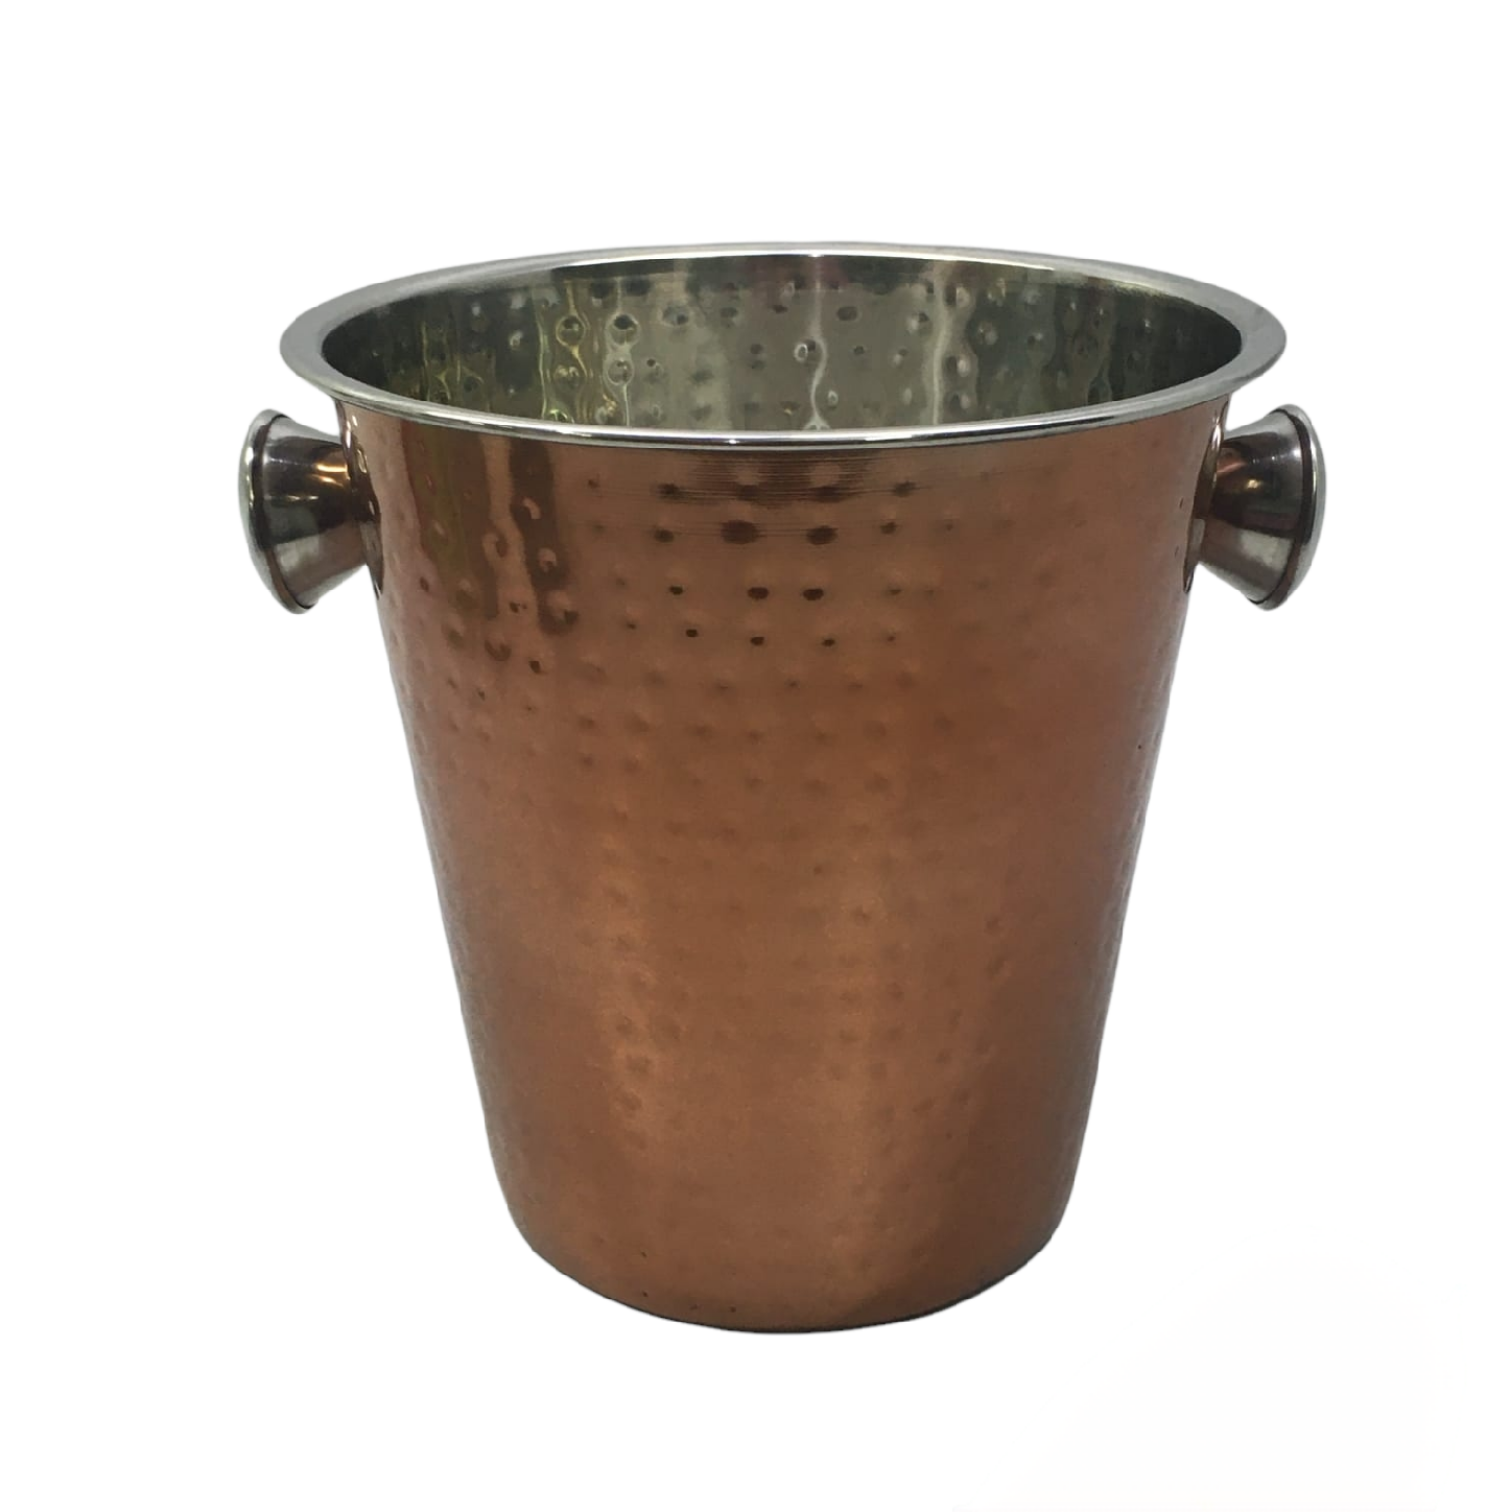 Ice Bucket Copper Finish Hammered 14x15cm Stainless Steel with Knob Handle